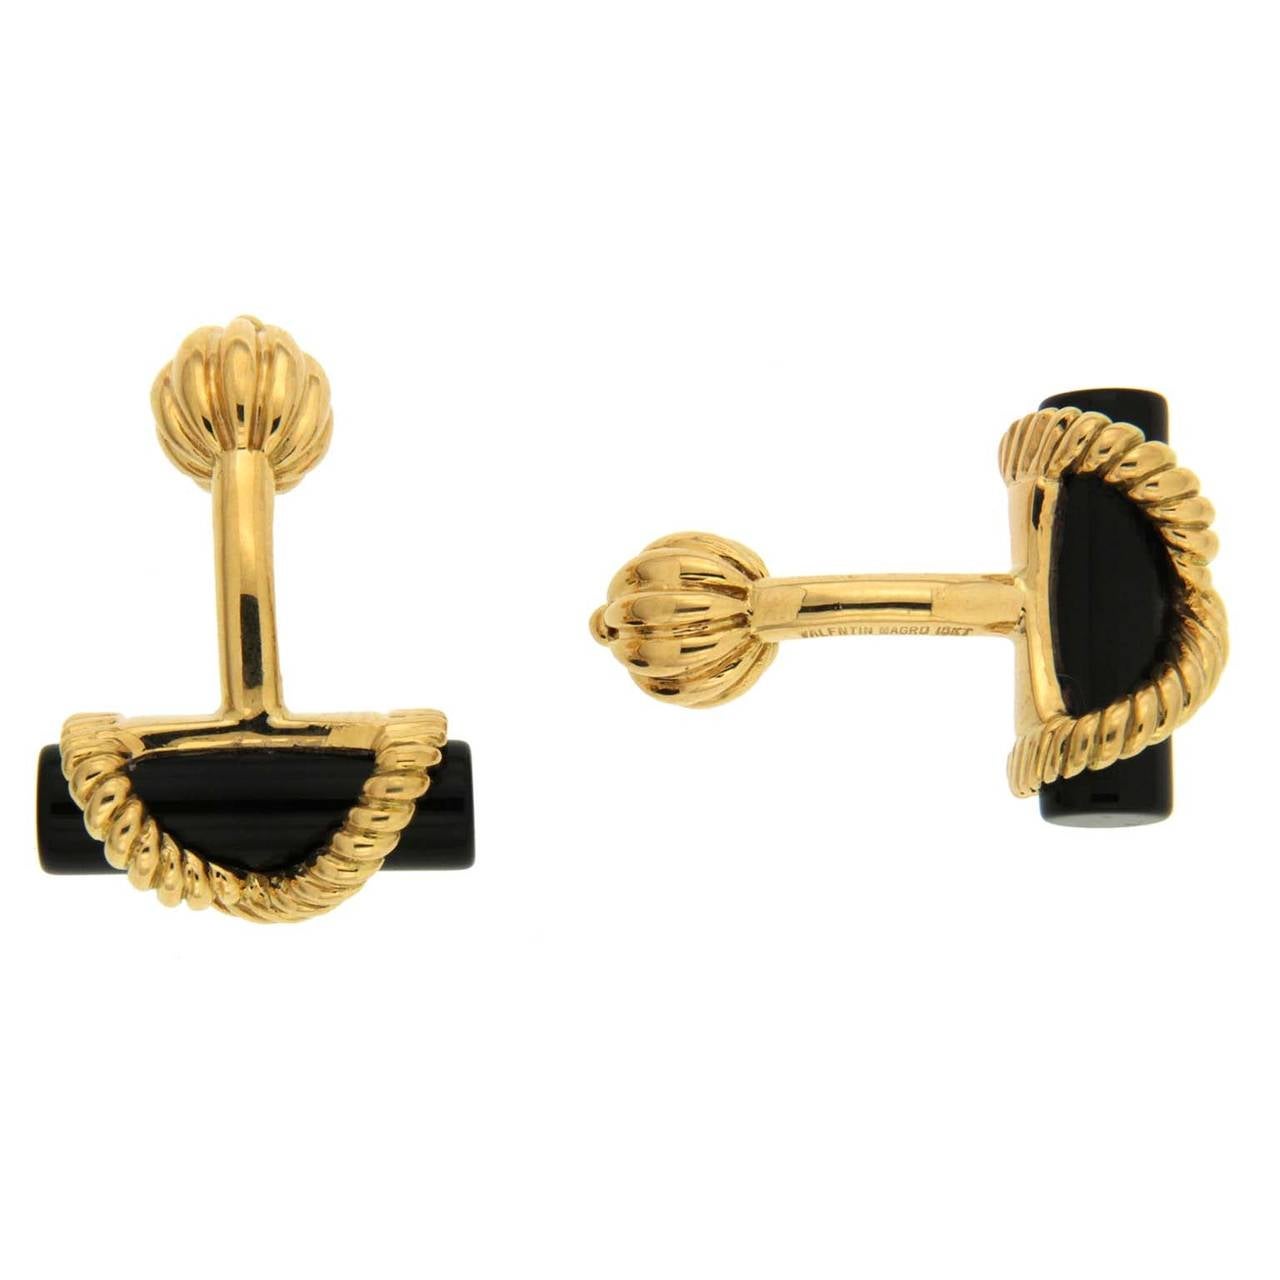 These cufflinks are made in 18kt yellow gold, they feature onyx round bars.